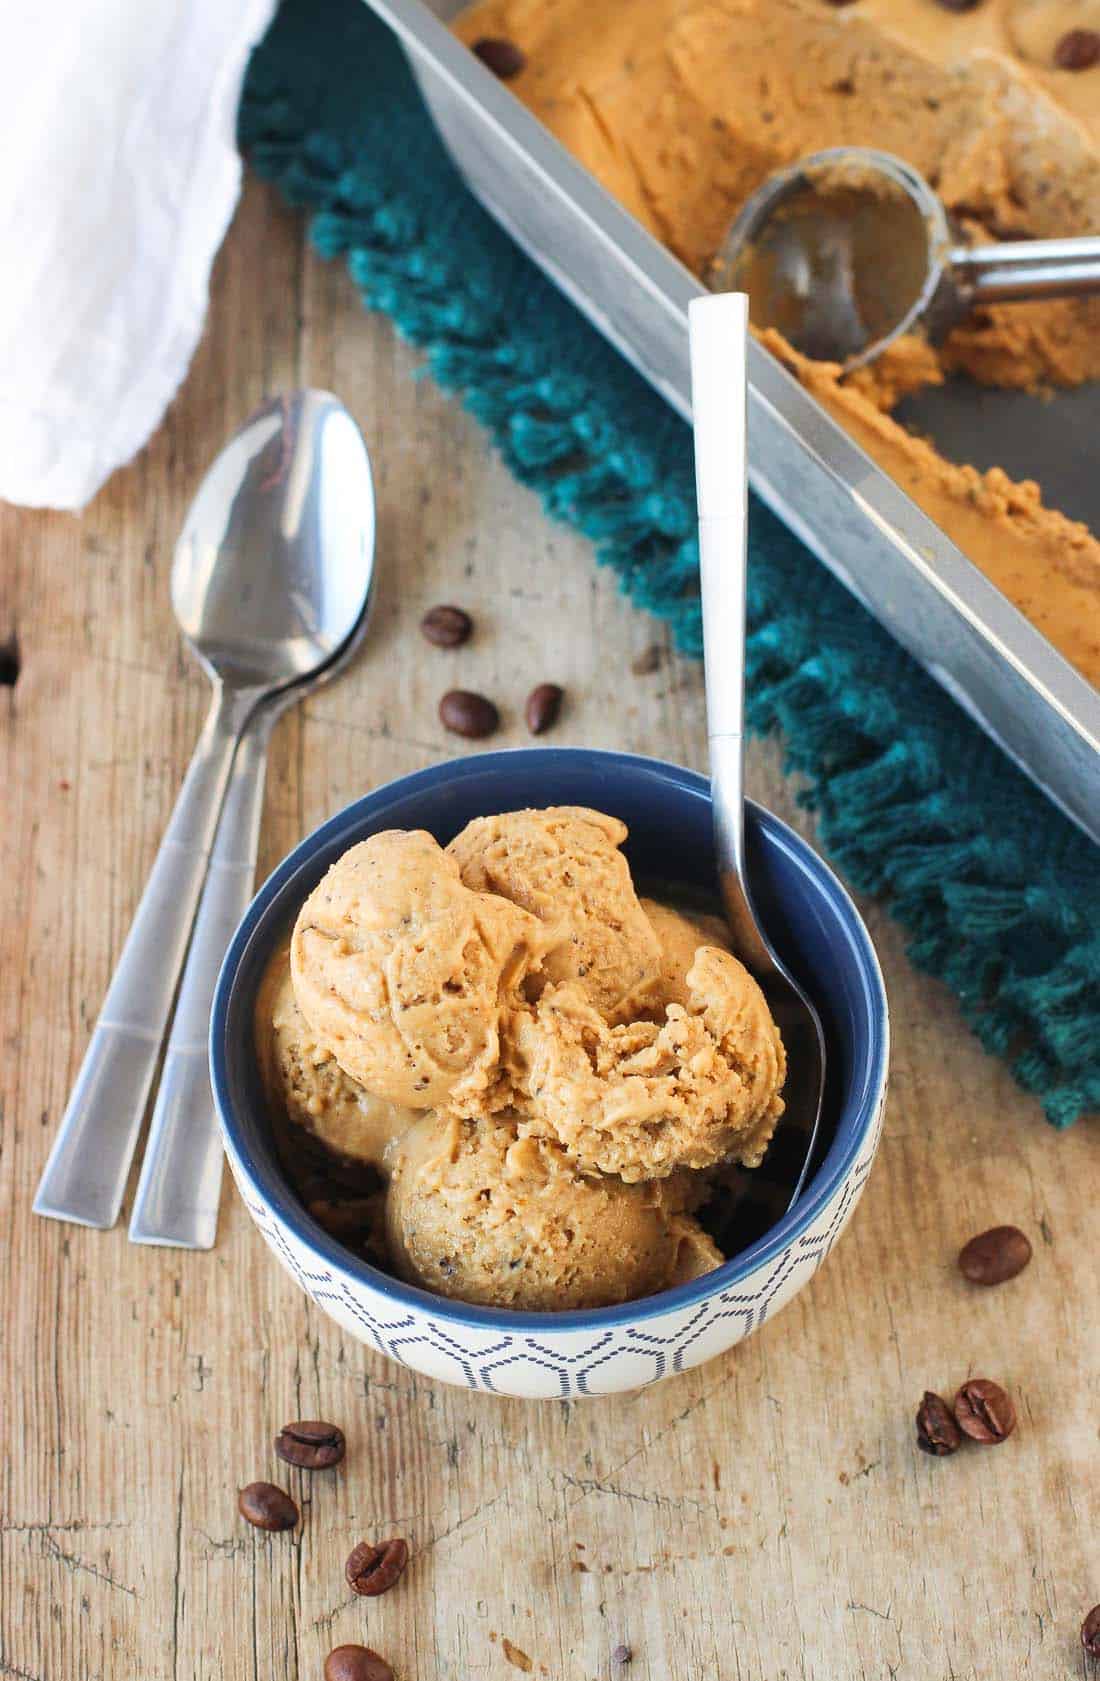 A bowl of vegan pumpkin ice cream with a spoon next to a metal carton of it